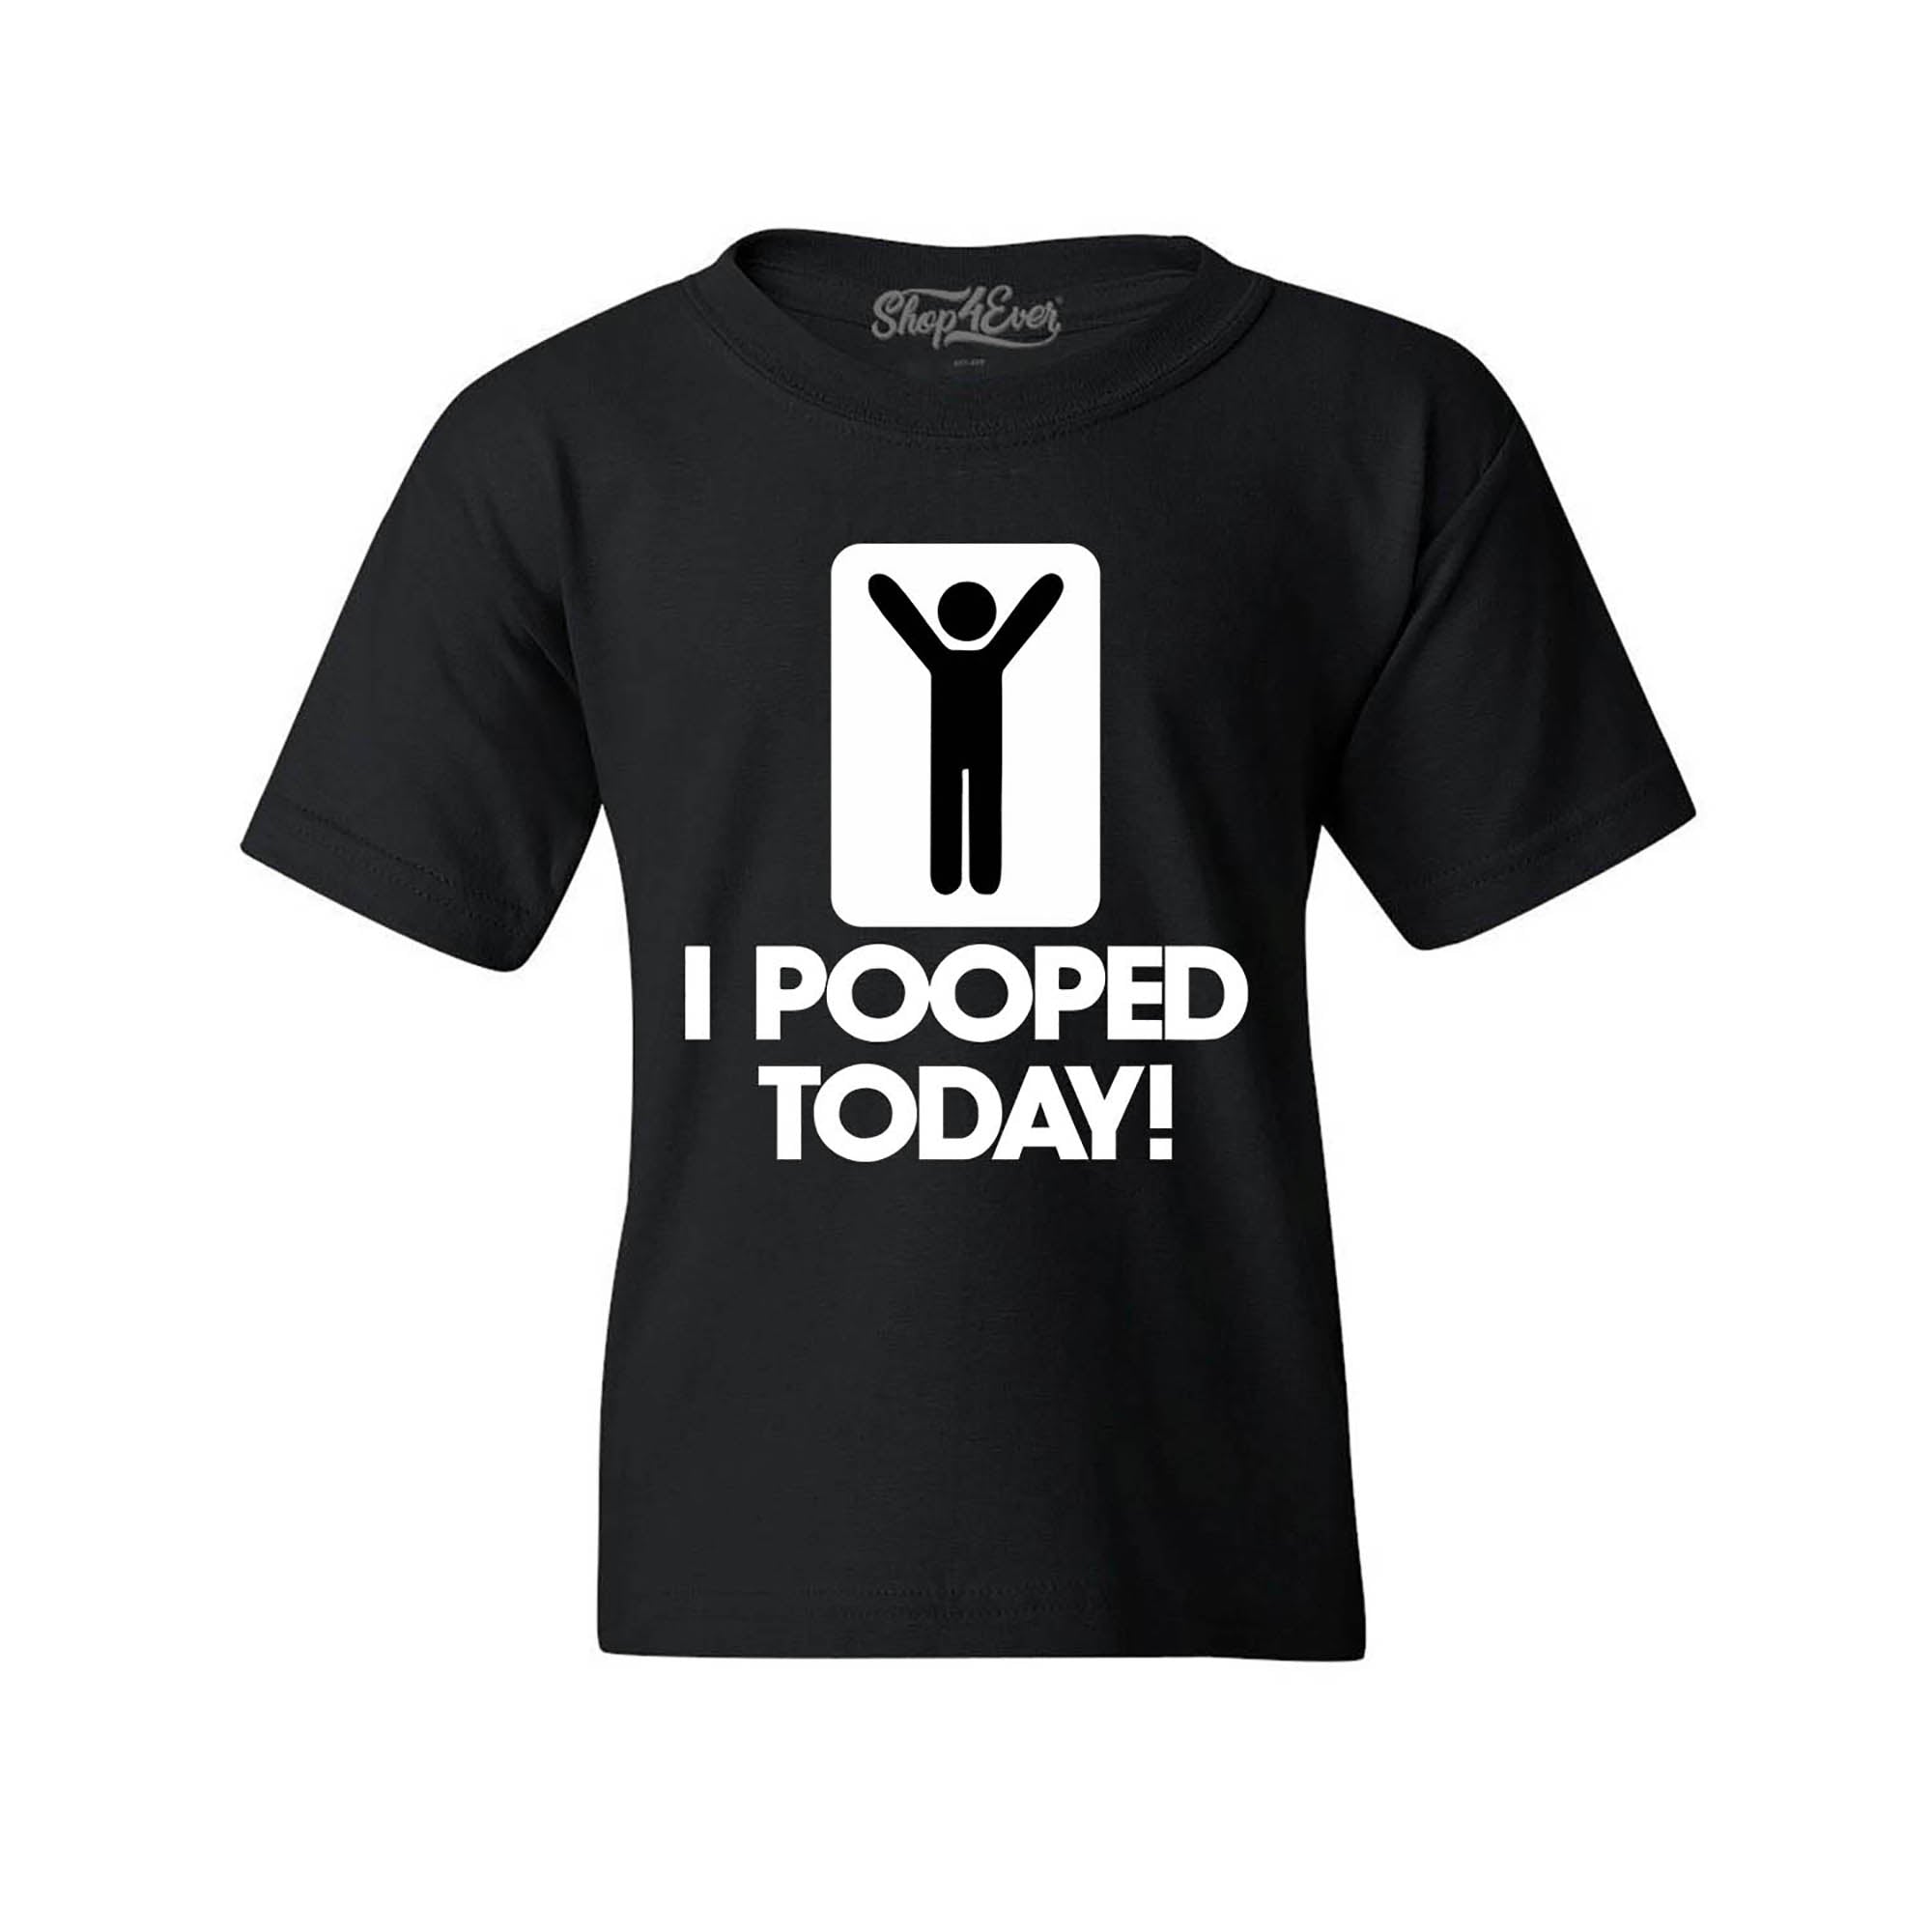 I Pooped Today Kids Child T-Shirt Funny Youth's Tee Shirts